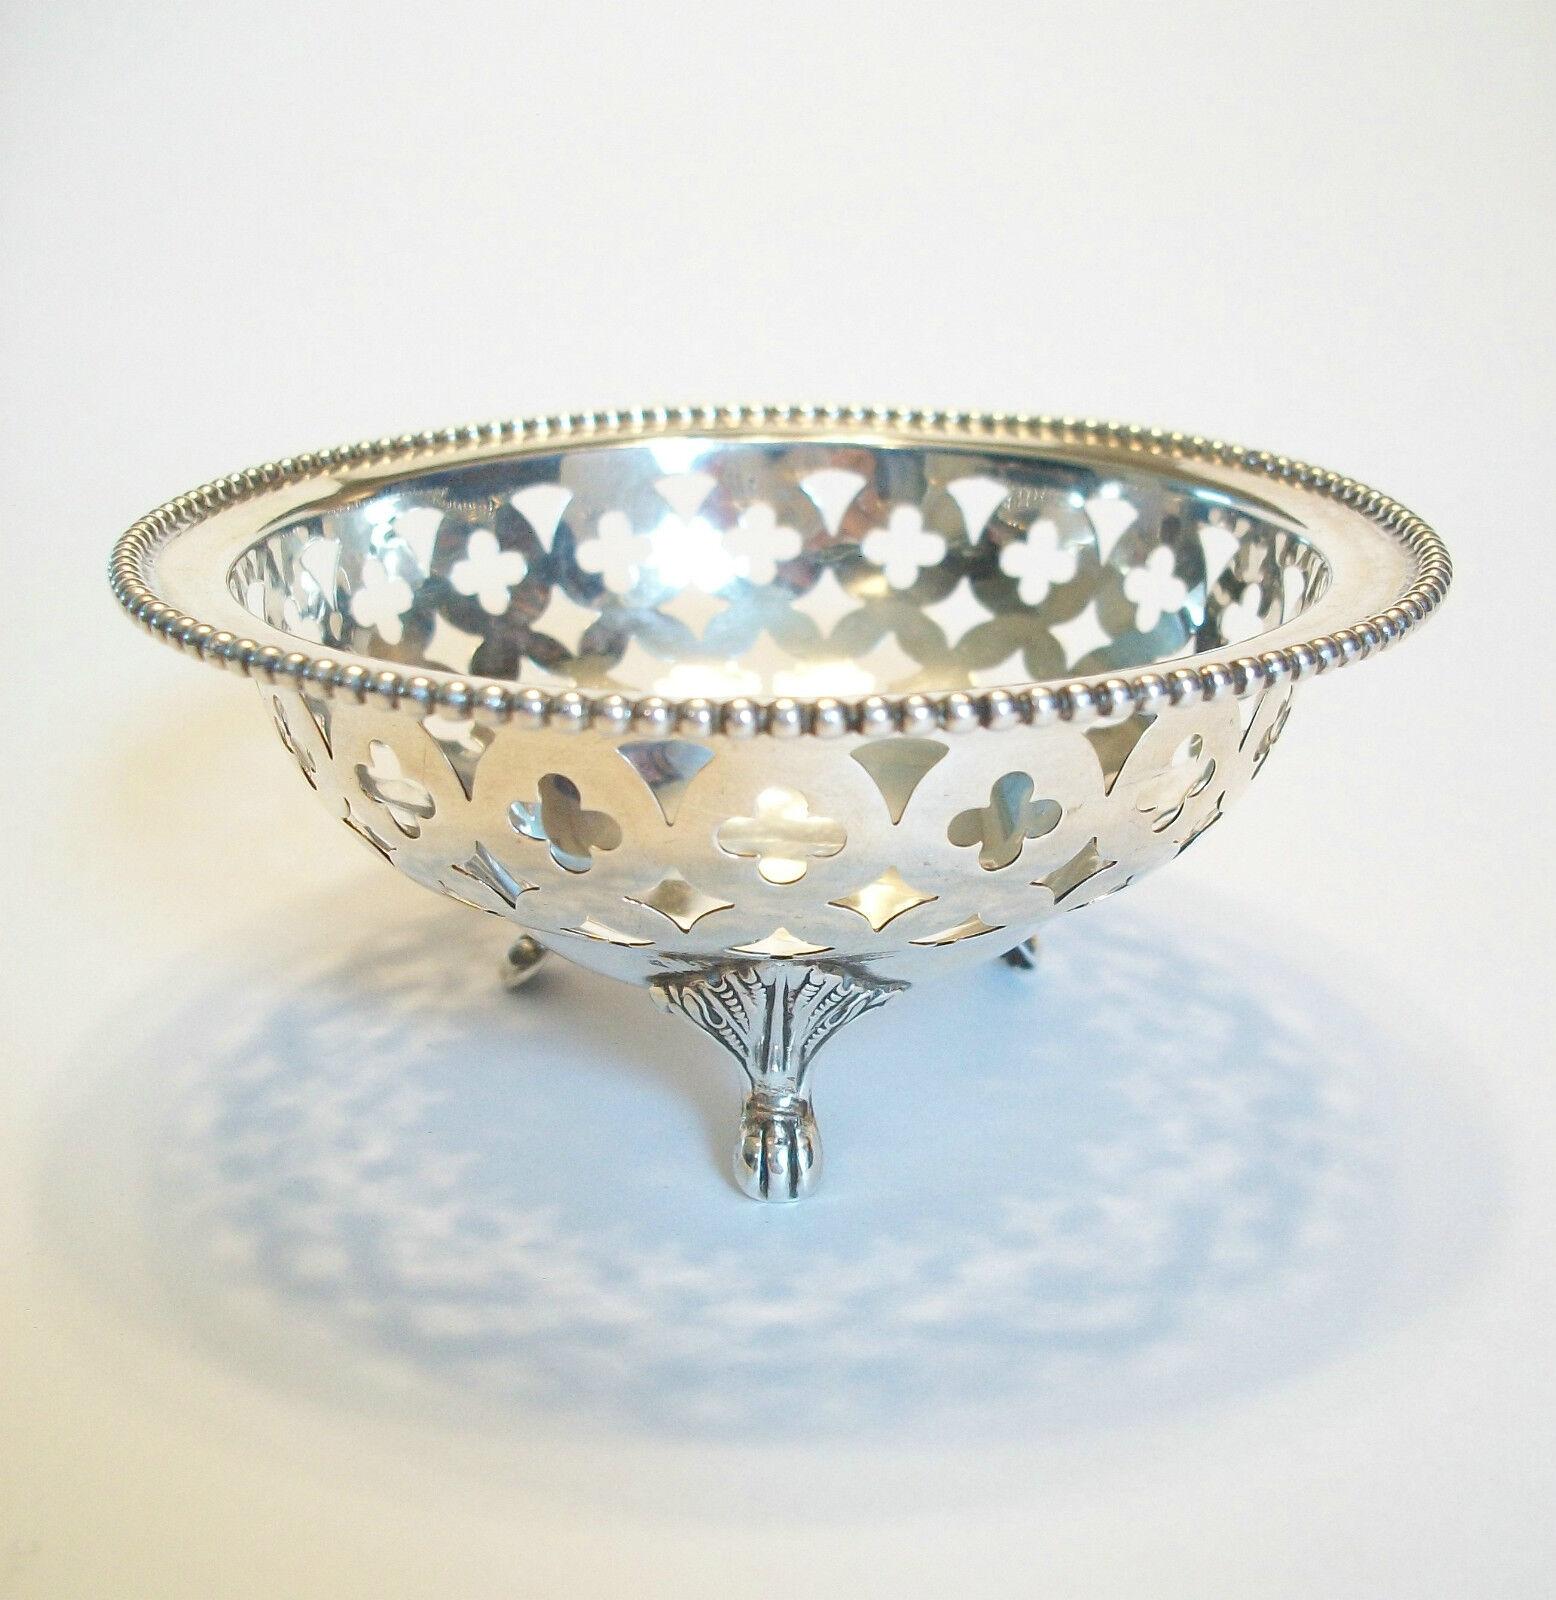 
RYRIE BROTHERS - Antique sterling silver bonbon or nut dish - featuring a pierced quatrefoil basket design on three scrolled feet with a beaded border rim - signed on the base - Canada - early 20th century.

Excellent antique condition - all